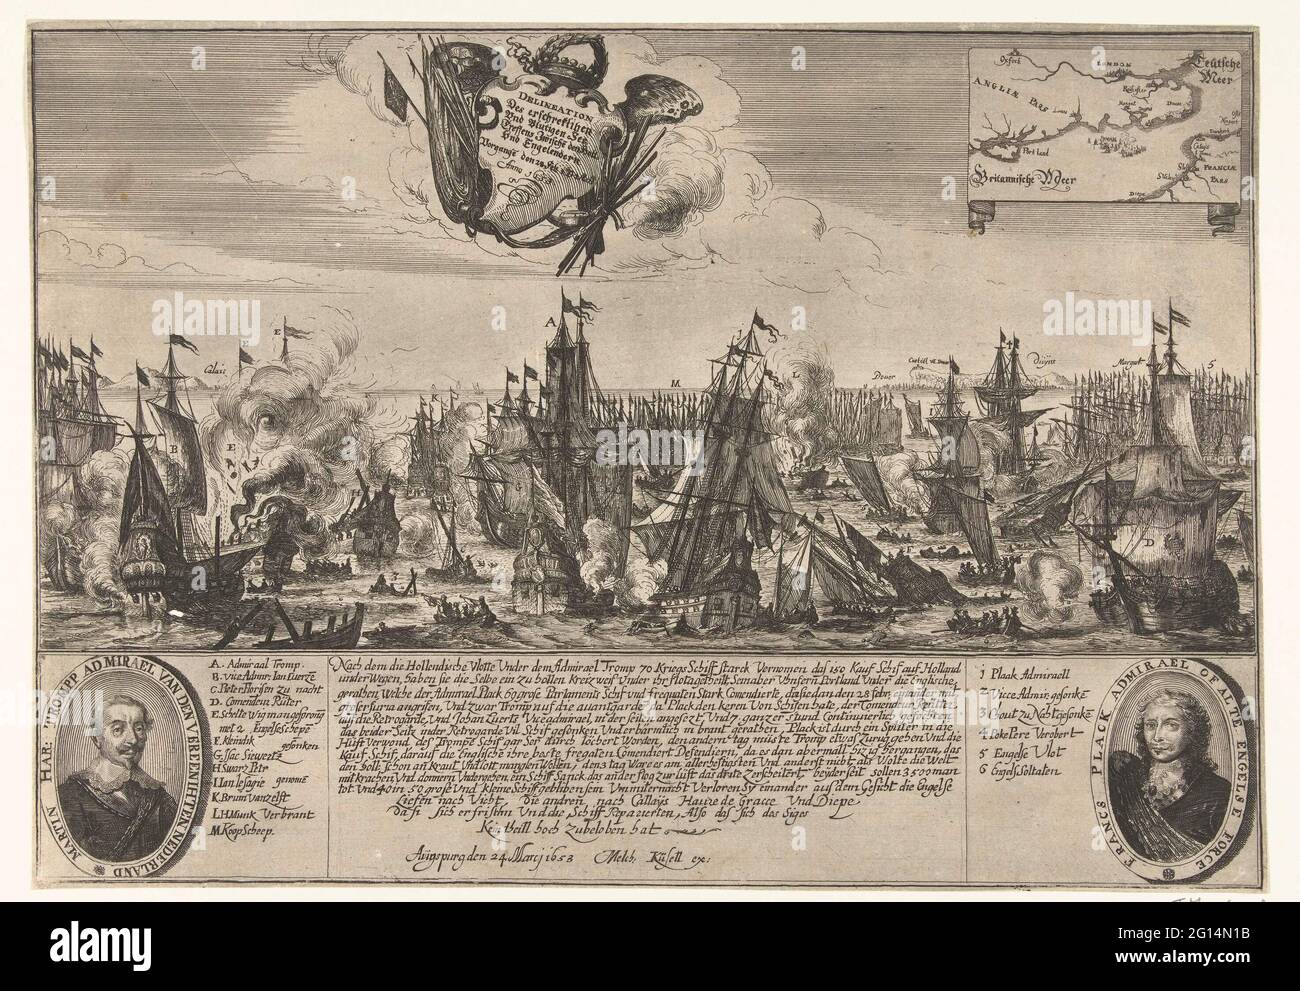 Three-day sea battle, 1653; Delination des Strengthslichen und Blutigen See Treffens Zwiep [n] den Holl. Und Engelendern VORGANGE [N] DEM 28 Feb. 1 & 2 Mart Anno 1653. Three-day sea battle for the English south coast in the first English war between the state fleet among Maarten Tromp and the English fleet among Robert Blake, 28 February - 2 March 1653. Central the sea battle, a winged cartouche in the air With the title, at the top right a bet with a channel card. At the bottom of a description of the events flanked by oval portraits of tromp and blake. Stock Photo